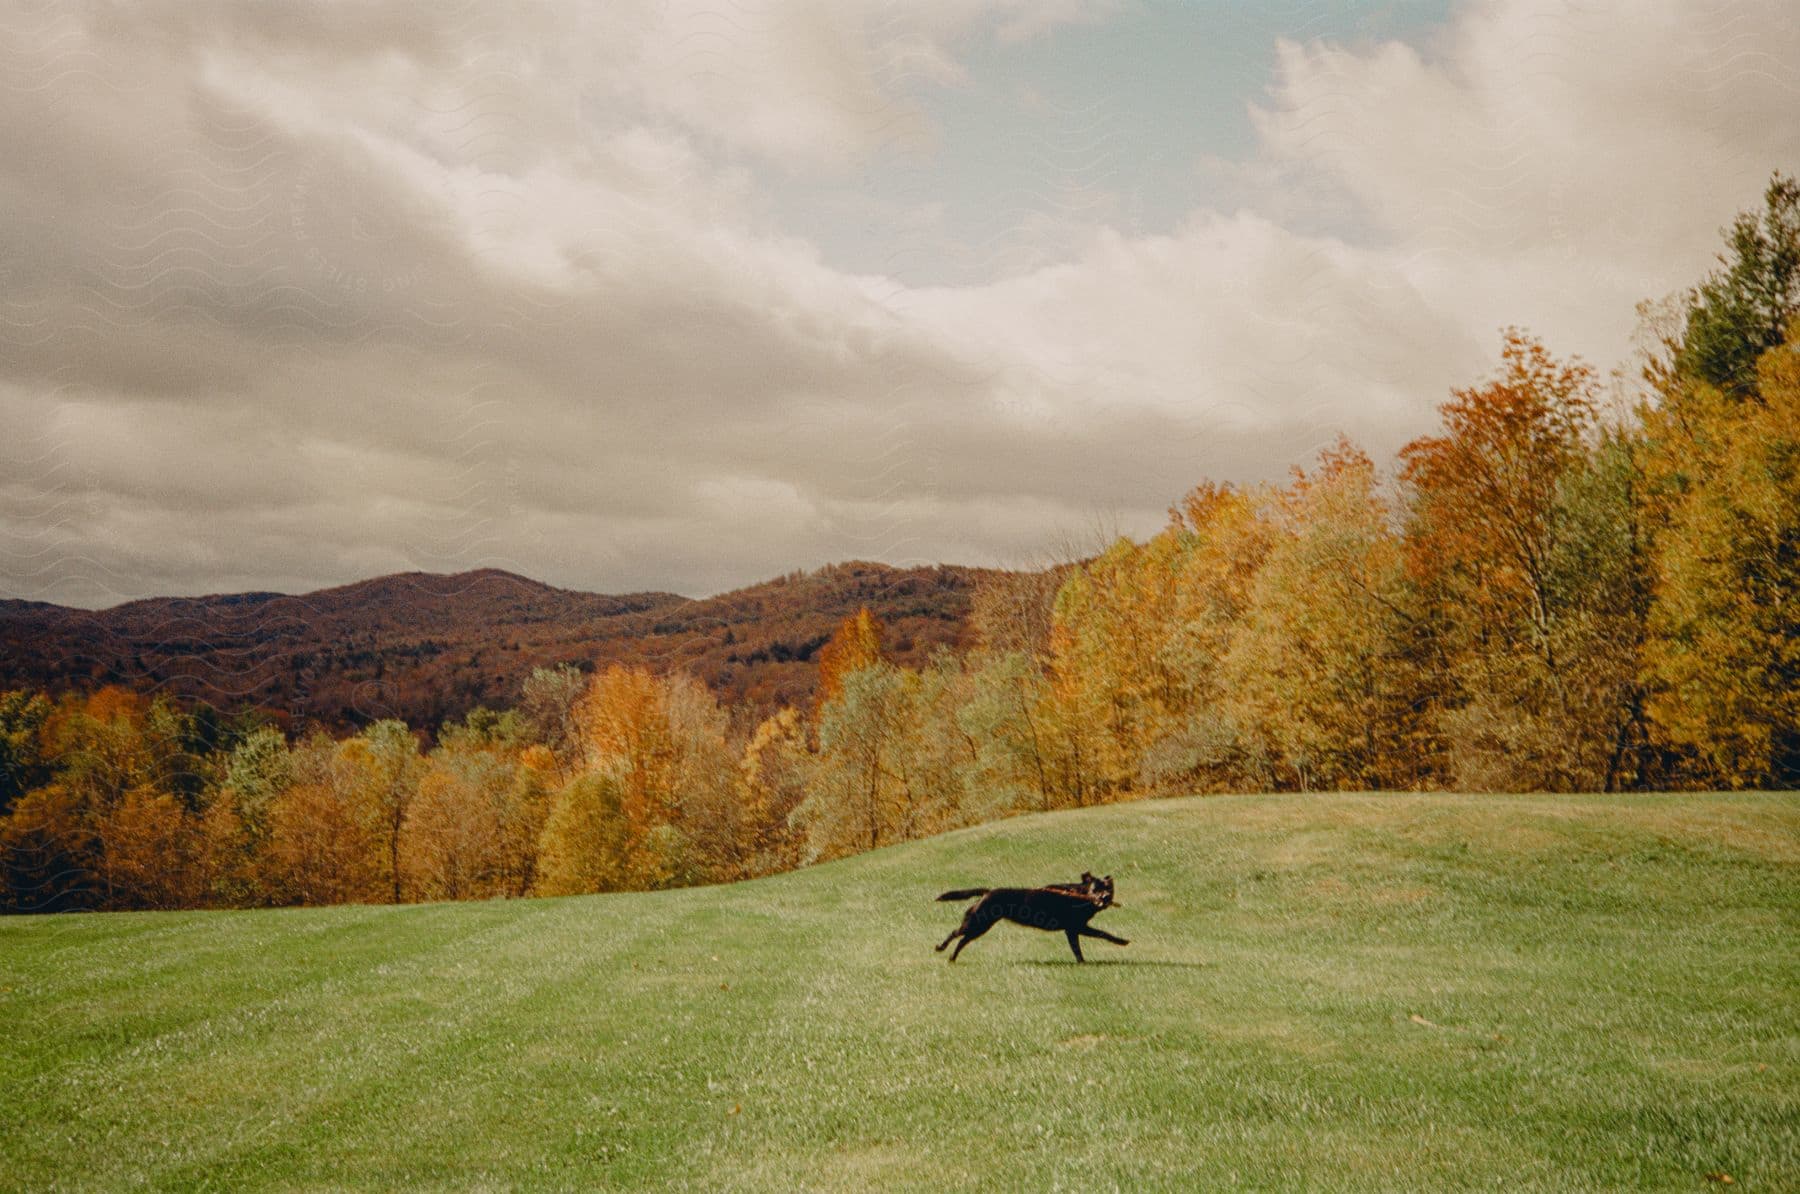 A black dog is running across the grass with a forest of trees in fall colors and mountains in the distance